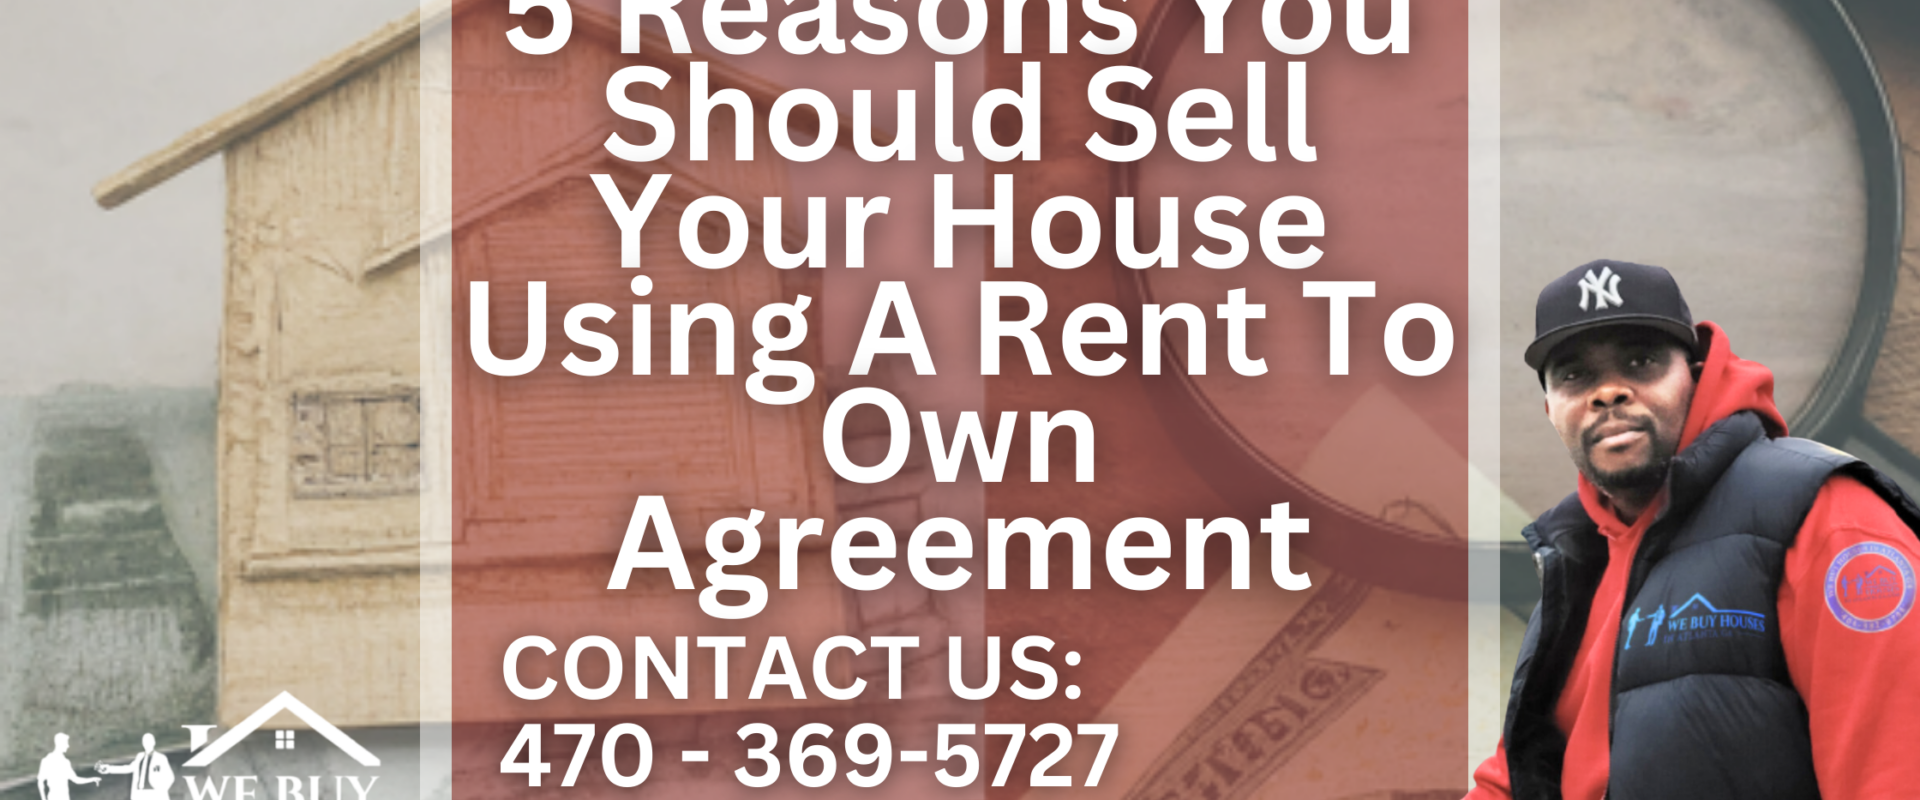 5 Reasons You Should Sell Your House Using A Rent To Own Agreement